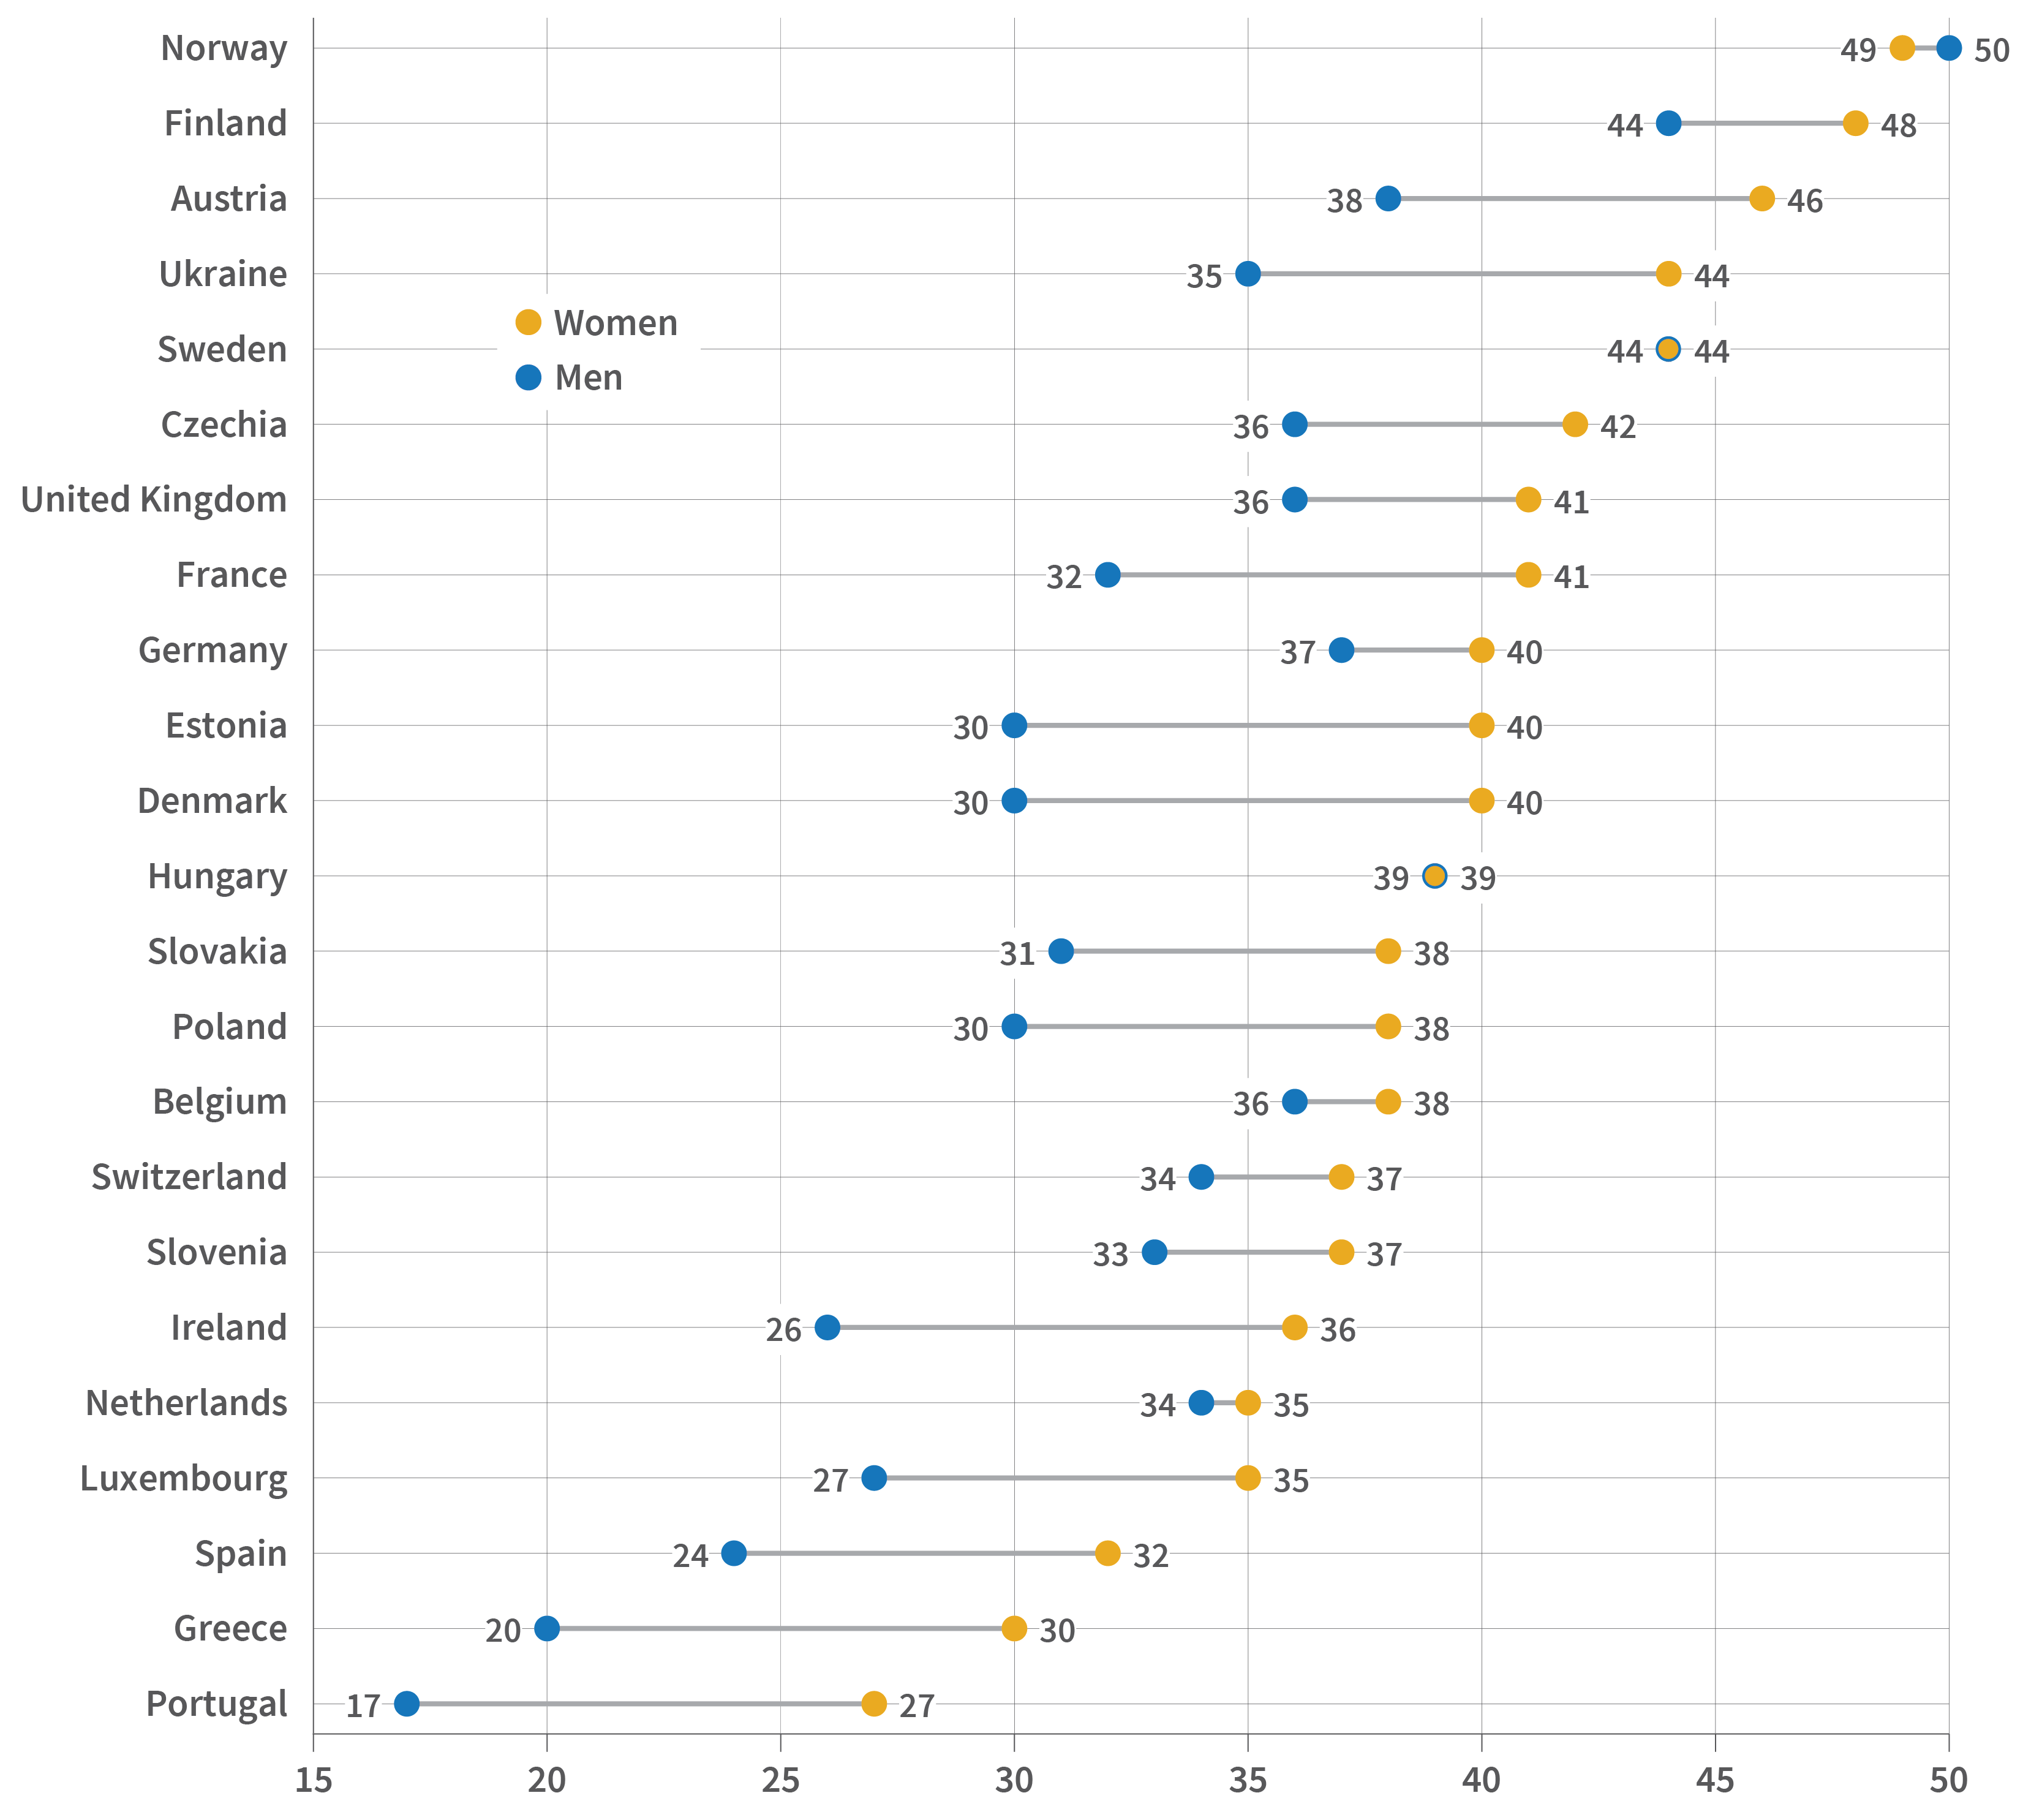 Graph depicting the difference in total care life expectancy at age 15 between men and women in 23 European countries.